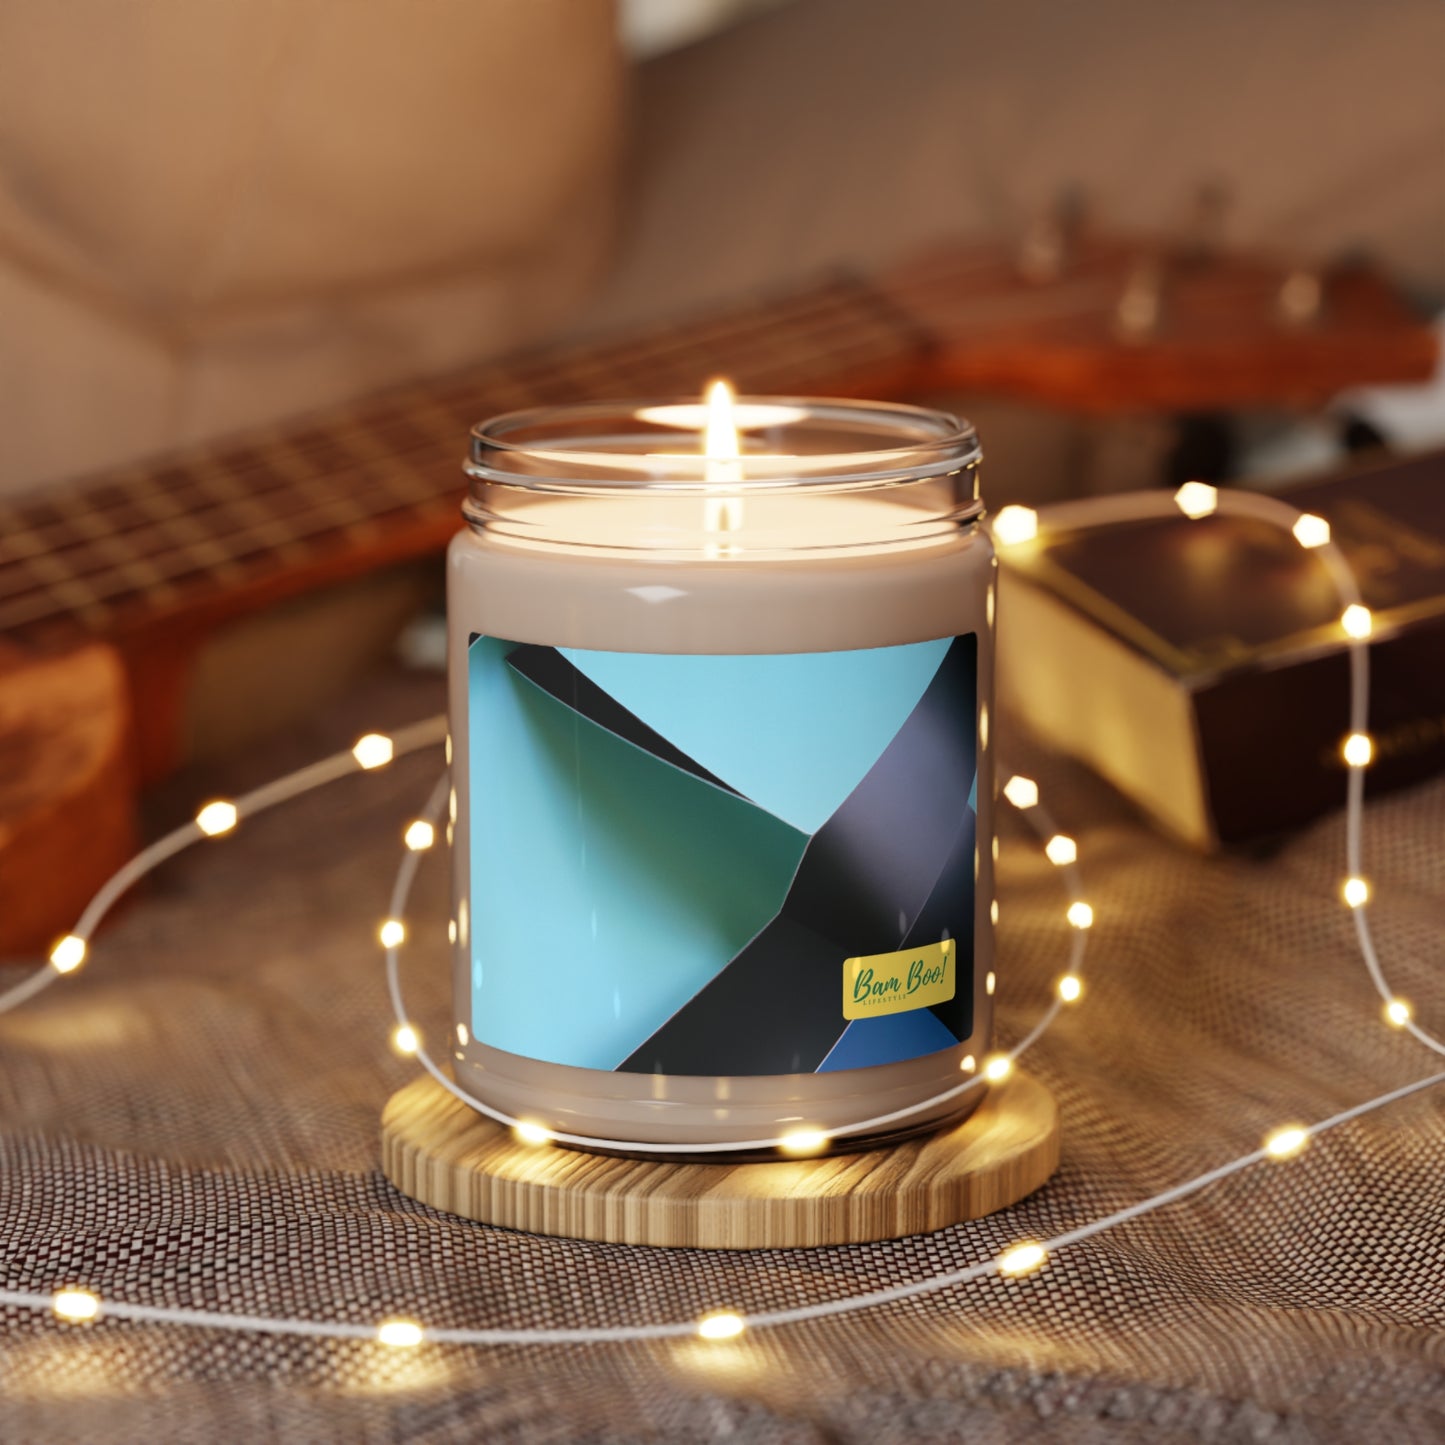 "A Colorful Geometric Ode to Everyday Beauty" - Bam Boo! Lifestyle Eco-friendly Soy Candle